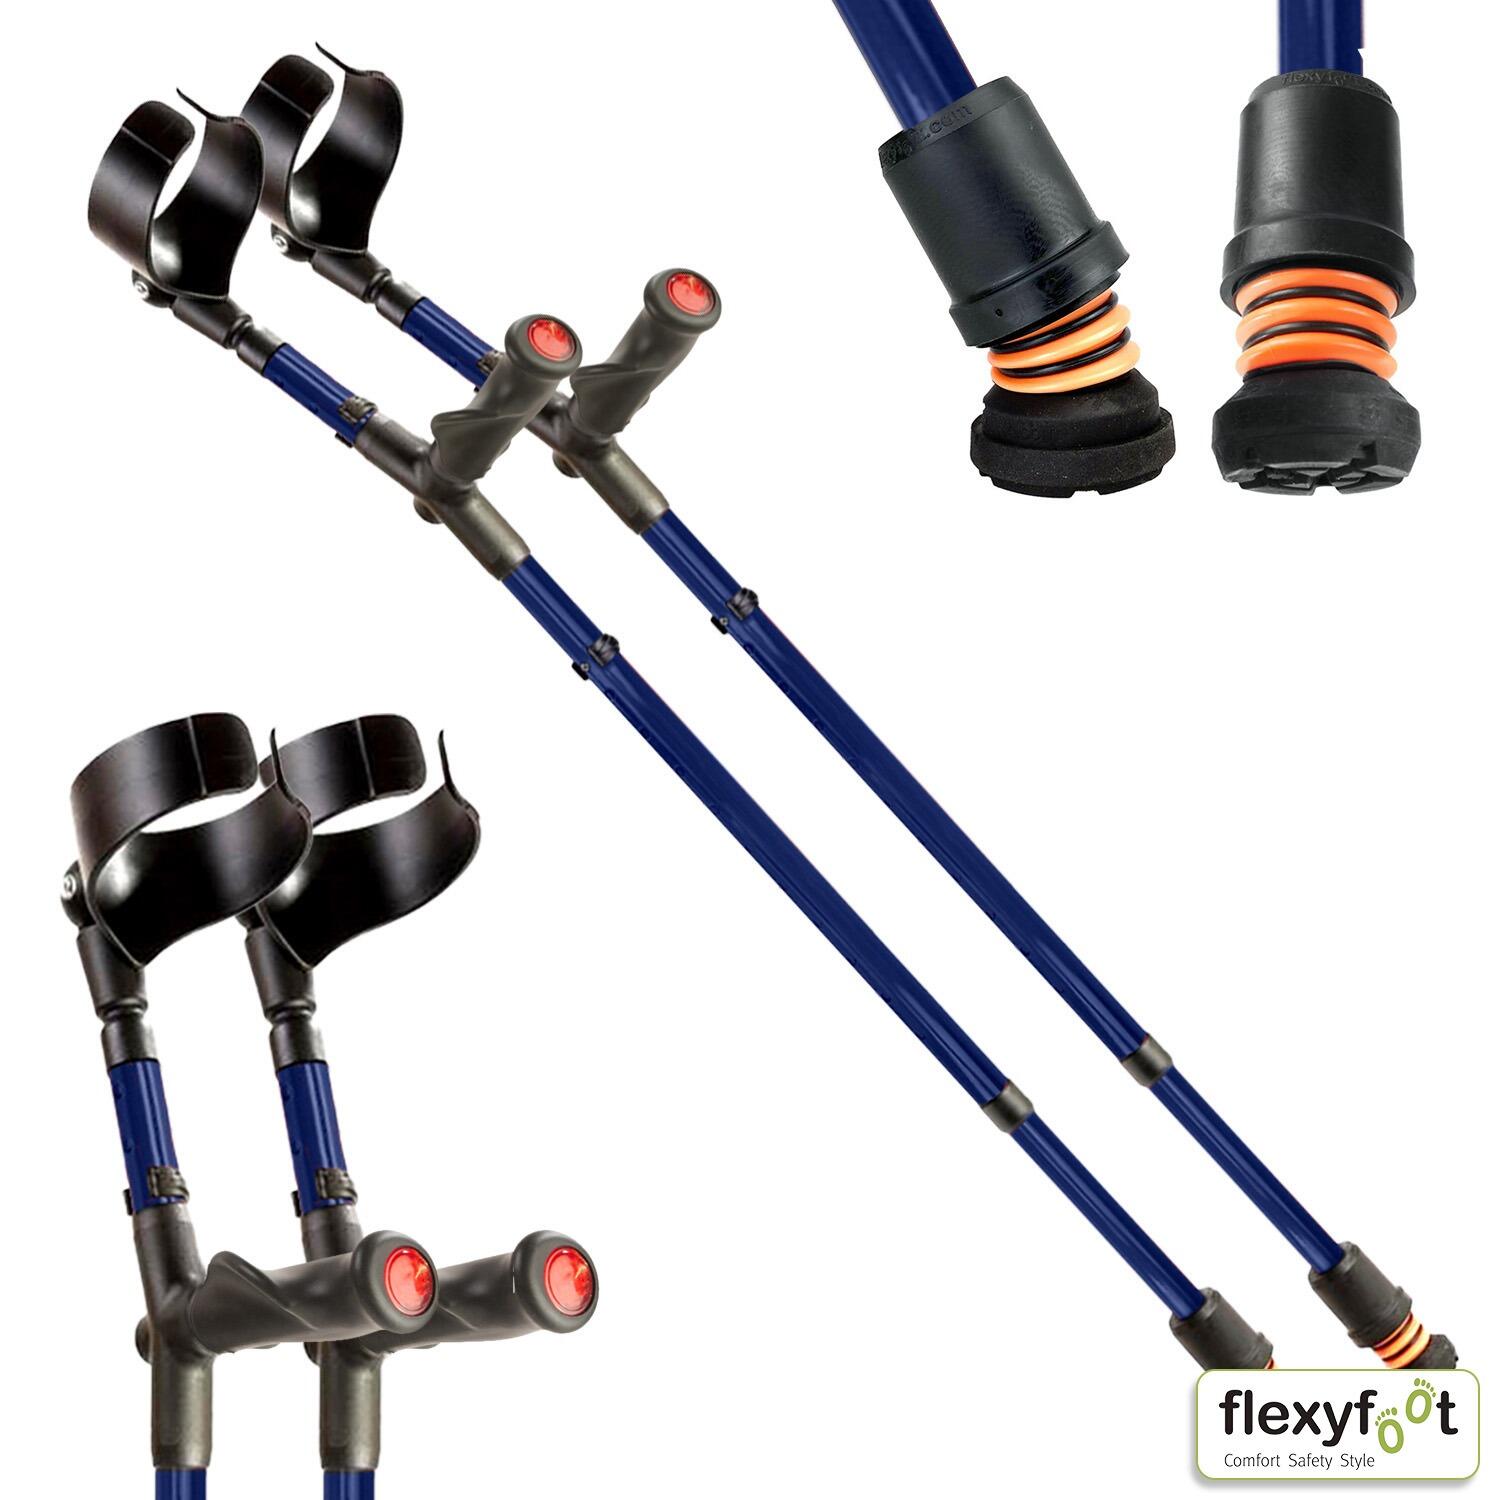 A Pair of Flexyfoot Comfort Grip Double Adjustable Crutches - Blue